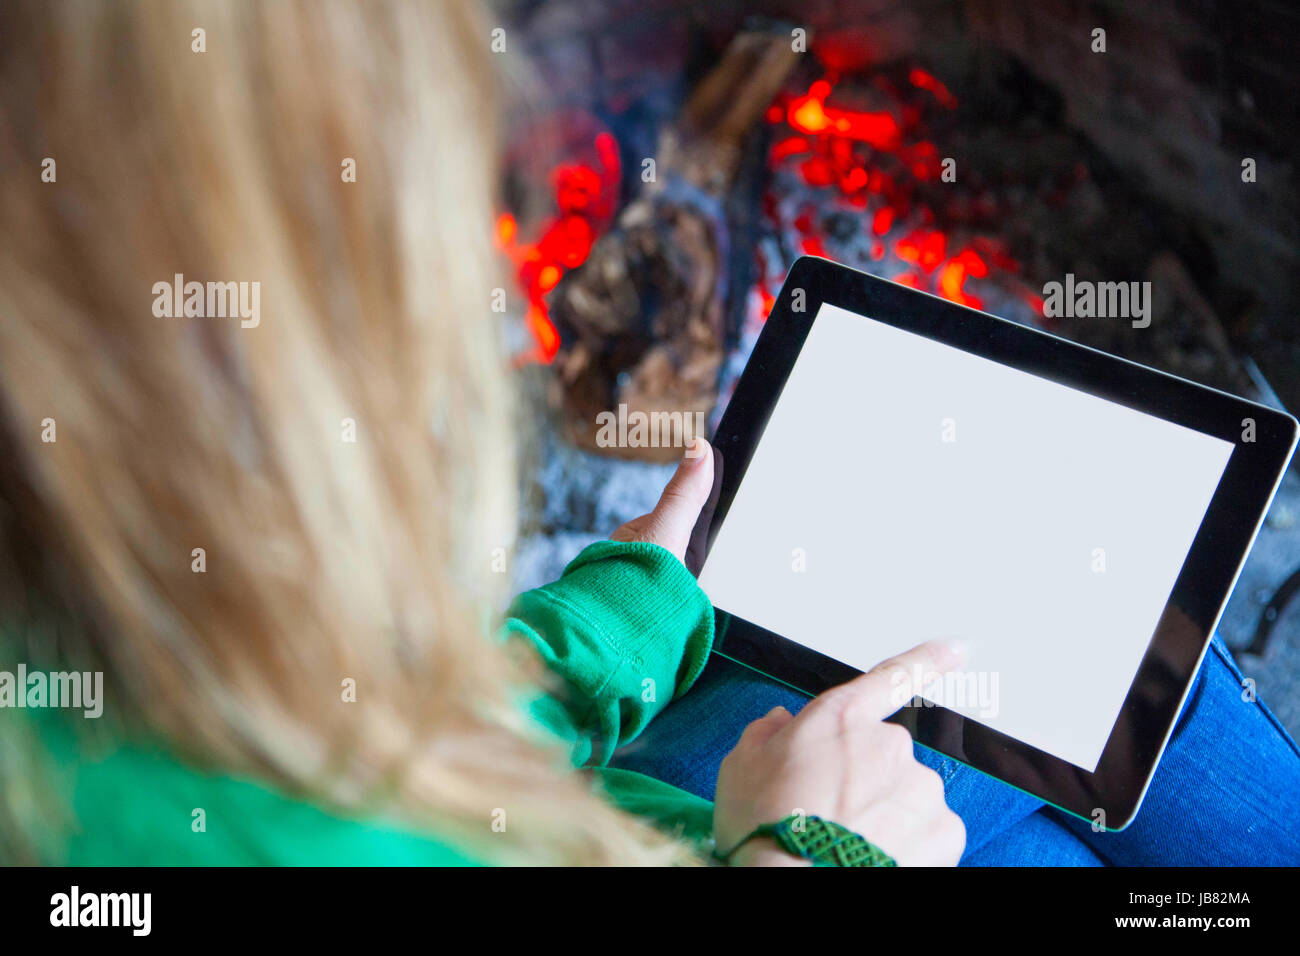 Woman with a tablet fire place and reading Stock Photo